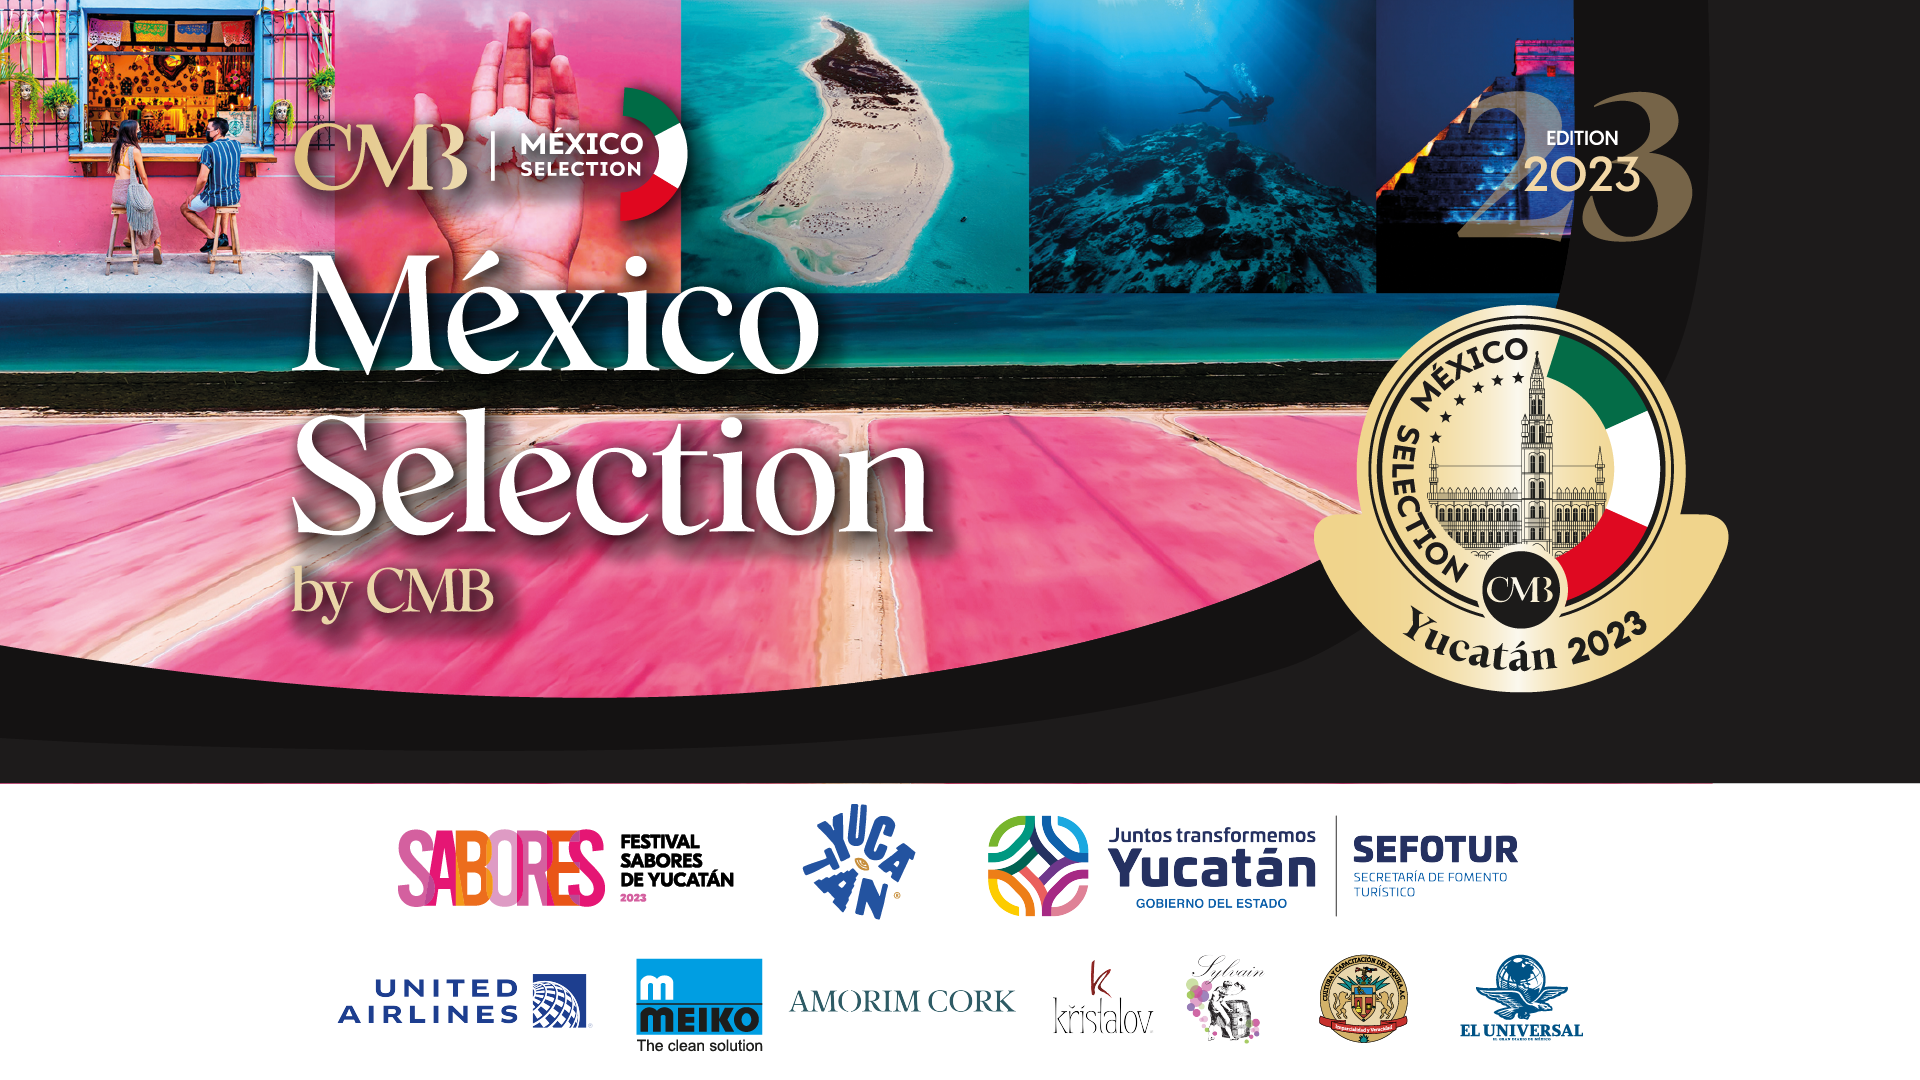 A total of 819 wines and spirits, from 20 states of Mexico, compete for medals of the México Selection by CMB Yucatán 2023. This is the largest blind tasting of Mexican wines and spirits ever held!